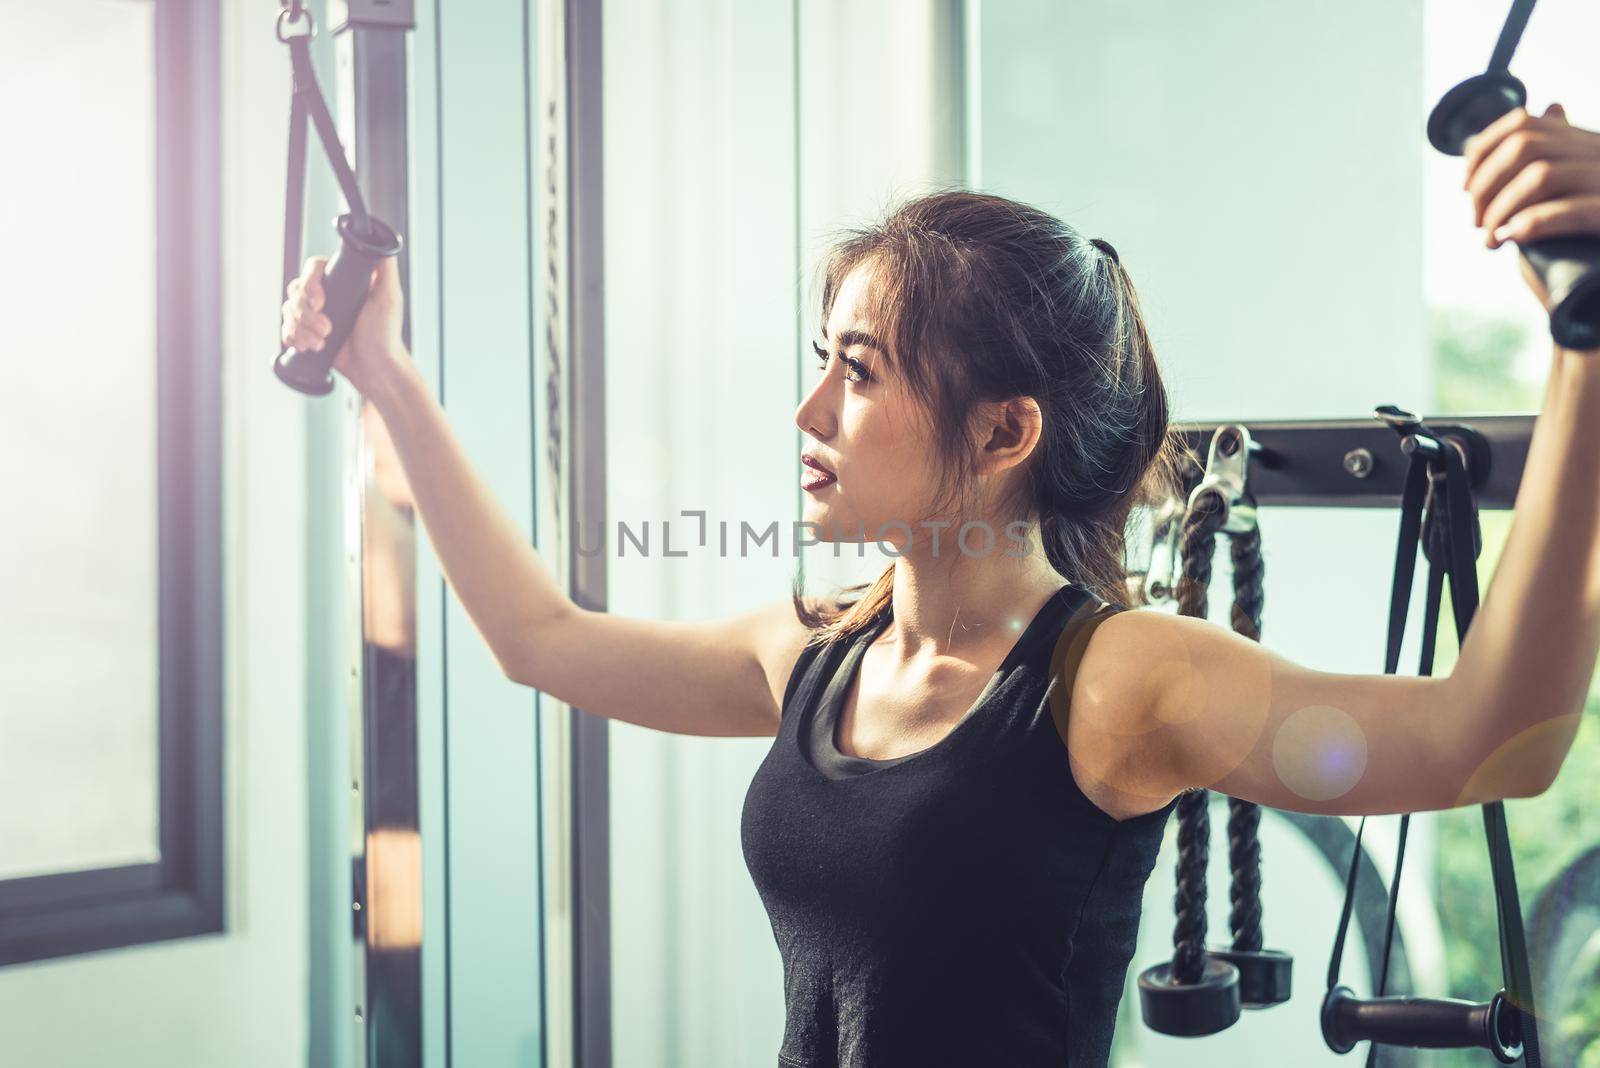 Asian young woman doing elastic rope exercises at cross fitness gym. Strength training and muscular Beauty and Healthy concept. Sport equipment and Sport club center theme.  by MiniStocker